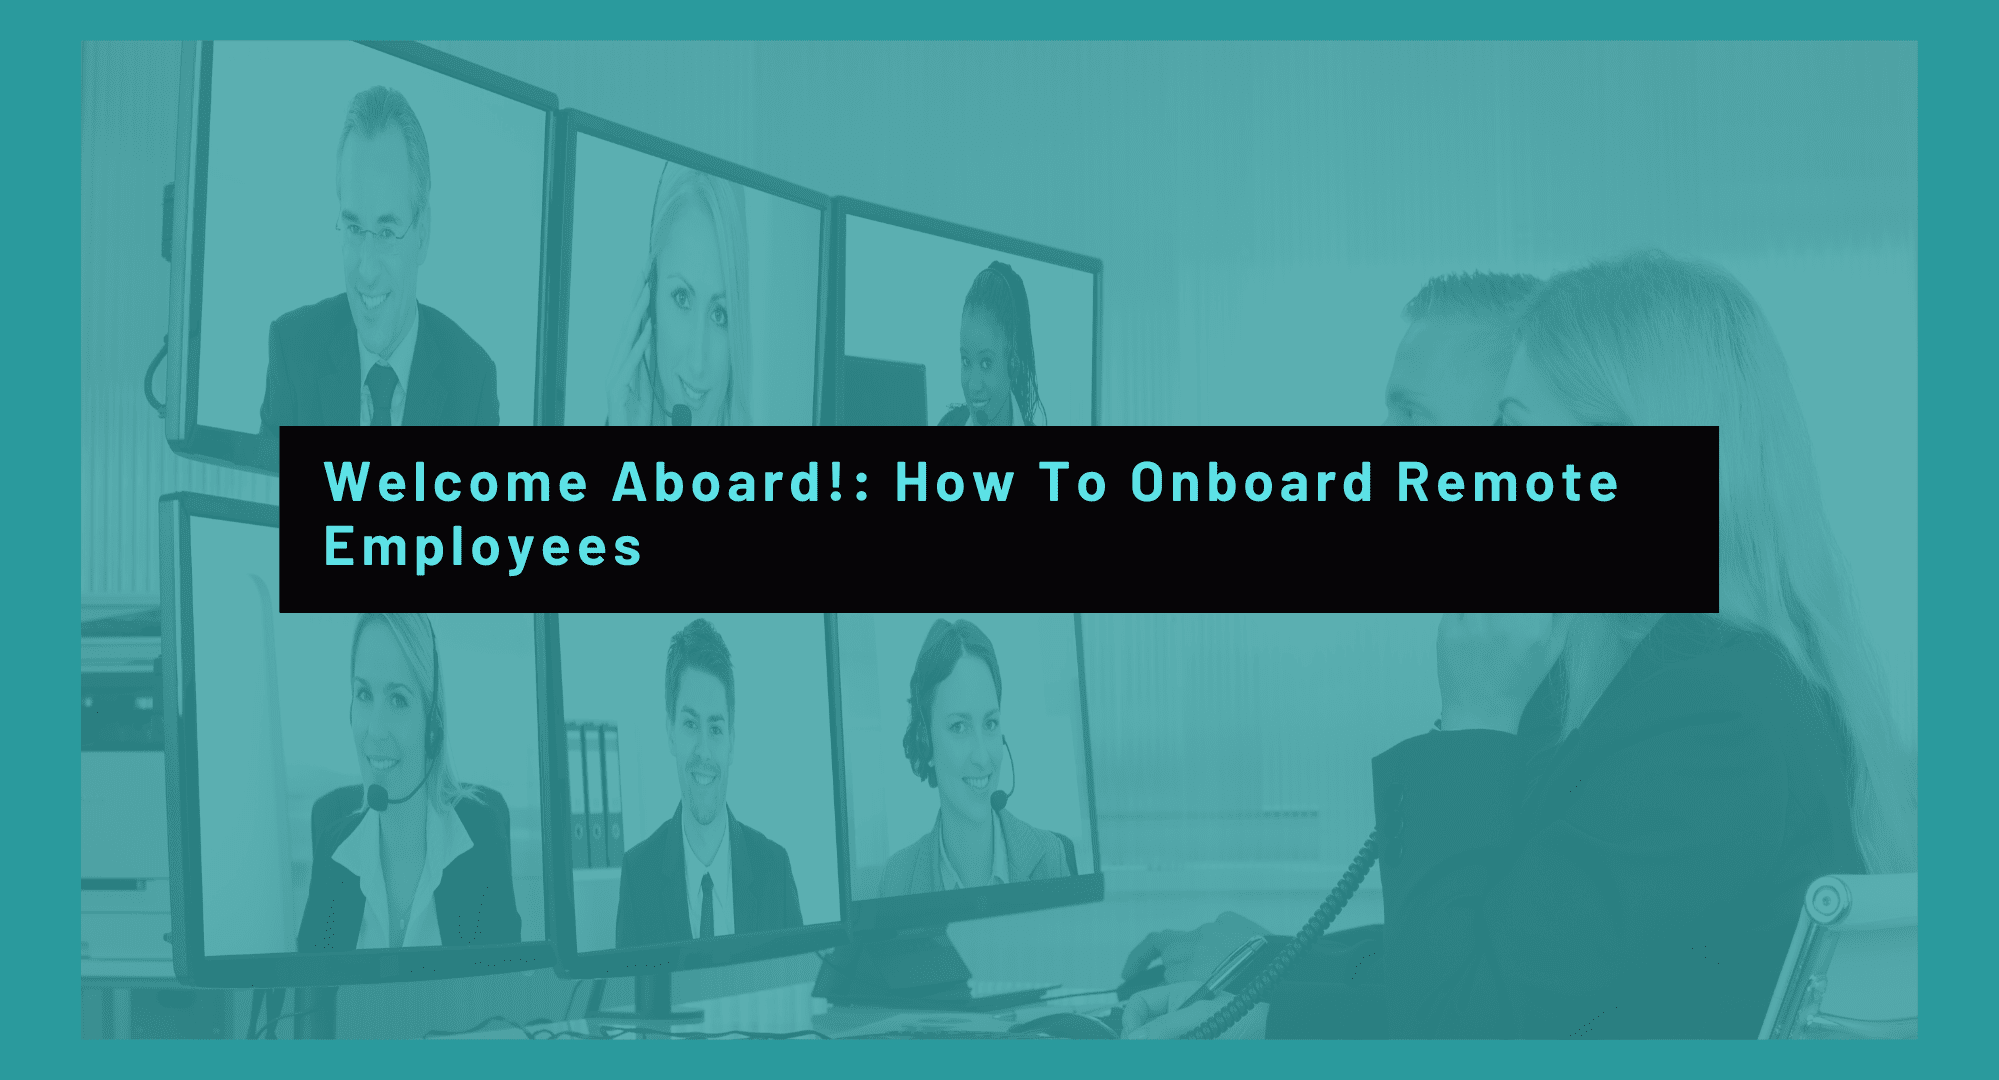 Welcome Aboard! How to Onboard Remote Empoyees, Tips To Onboard Remote Employees During Covid 19, How to successfully onboard a new employee during COVID-19, Tips for Employee Orientation During COVID-19.